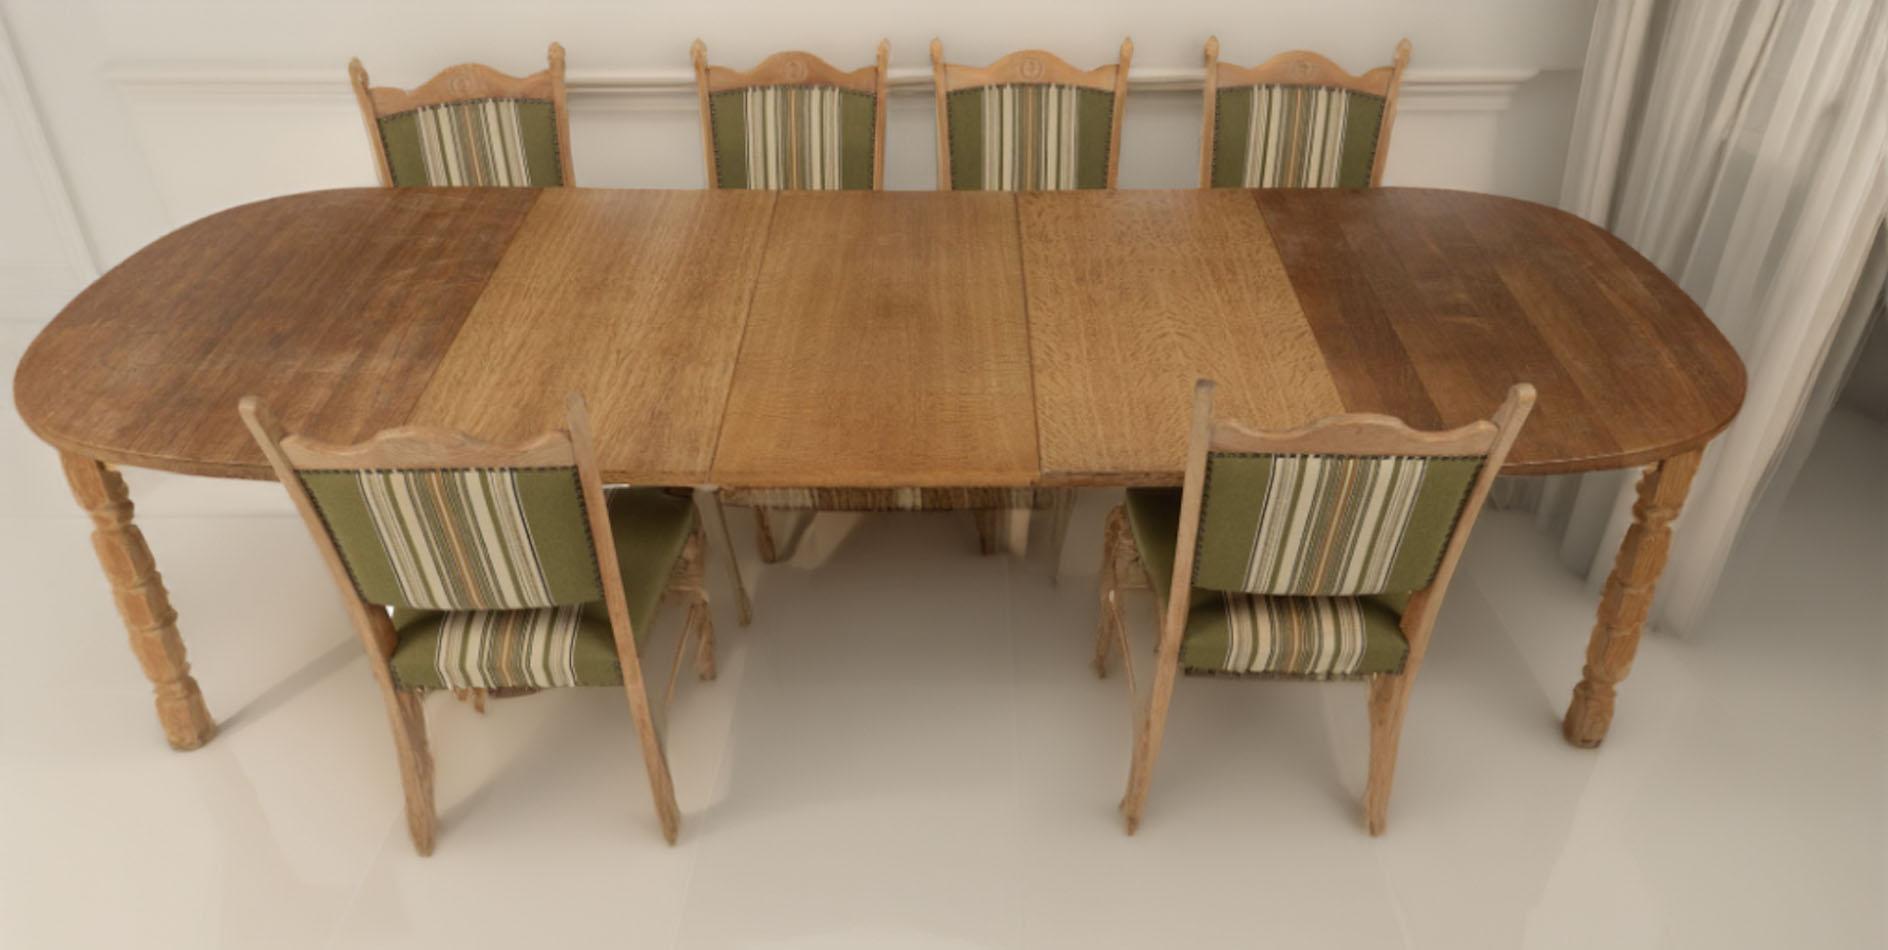 Rustic Henning Kjærnulf Oak Dining Table and 6 Dining Chairs, Denmark, Circa 1960s